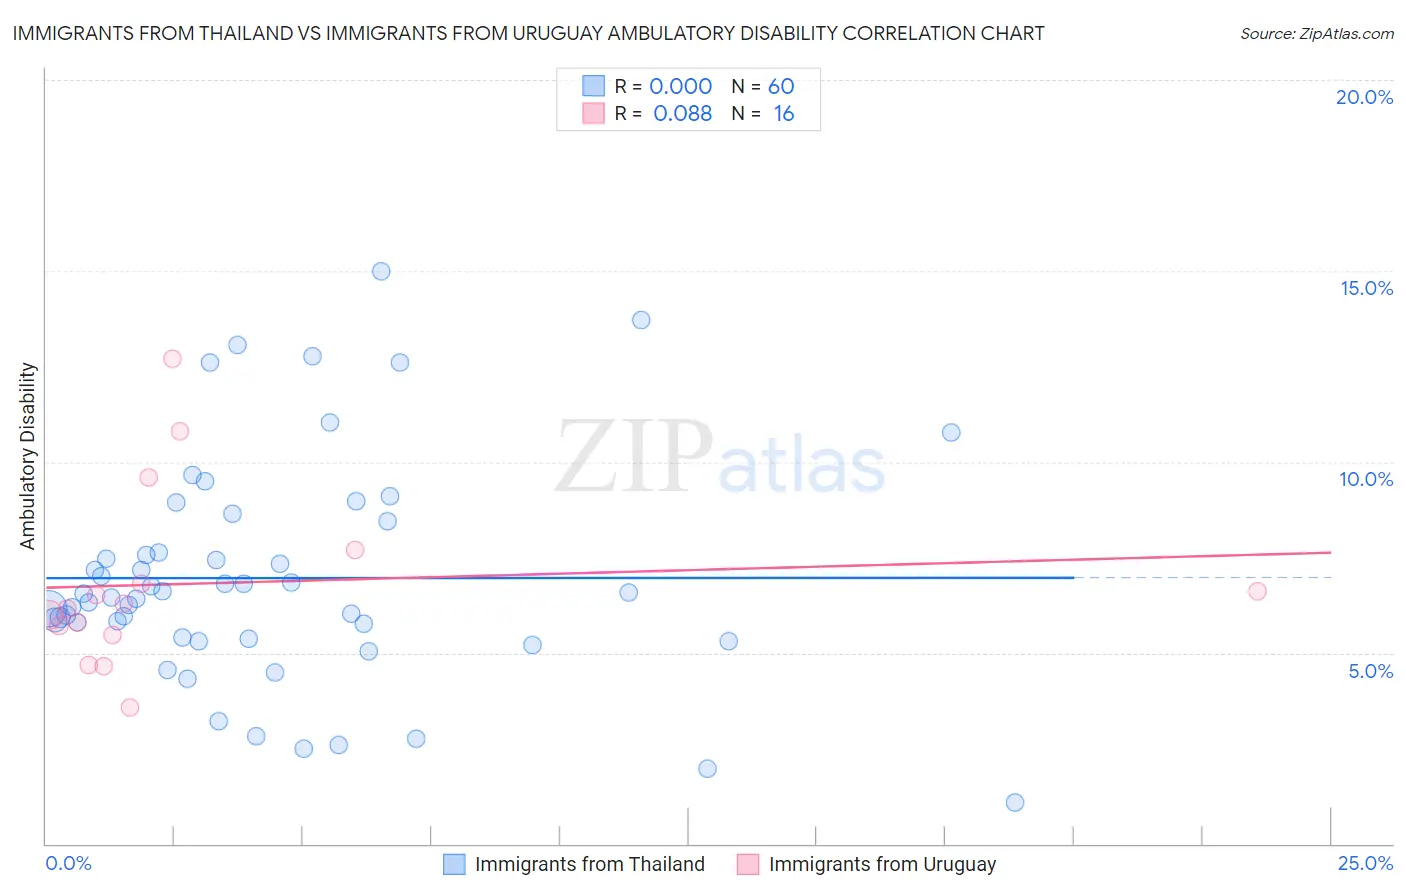 Immigrants from Thailand vs Immigrants from Uruguay Ambulatory Disability